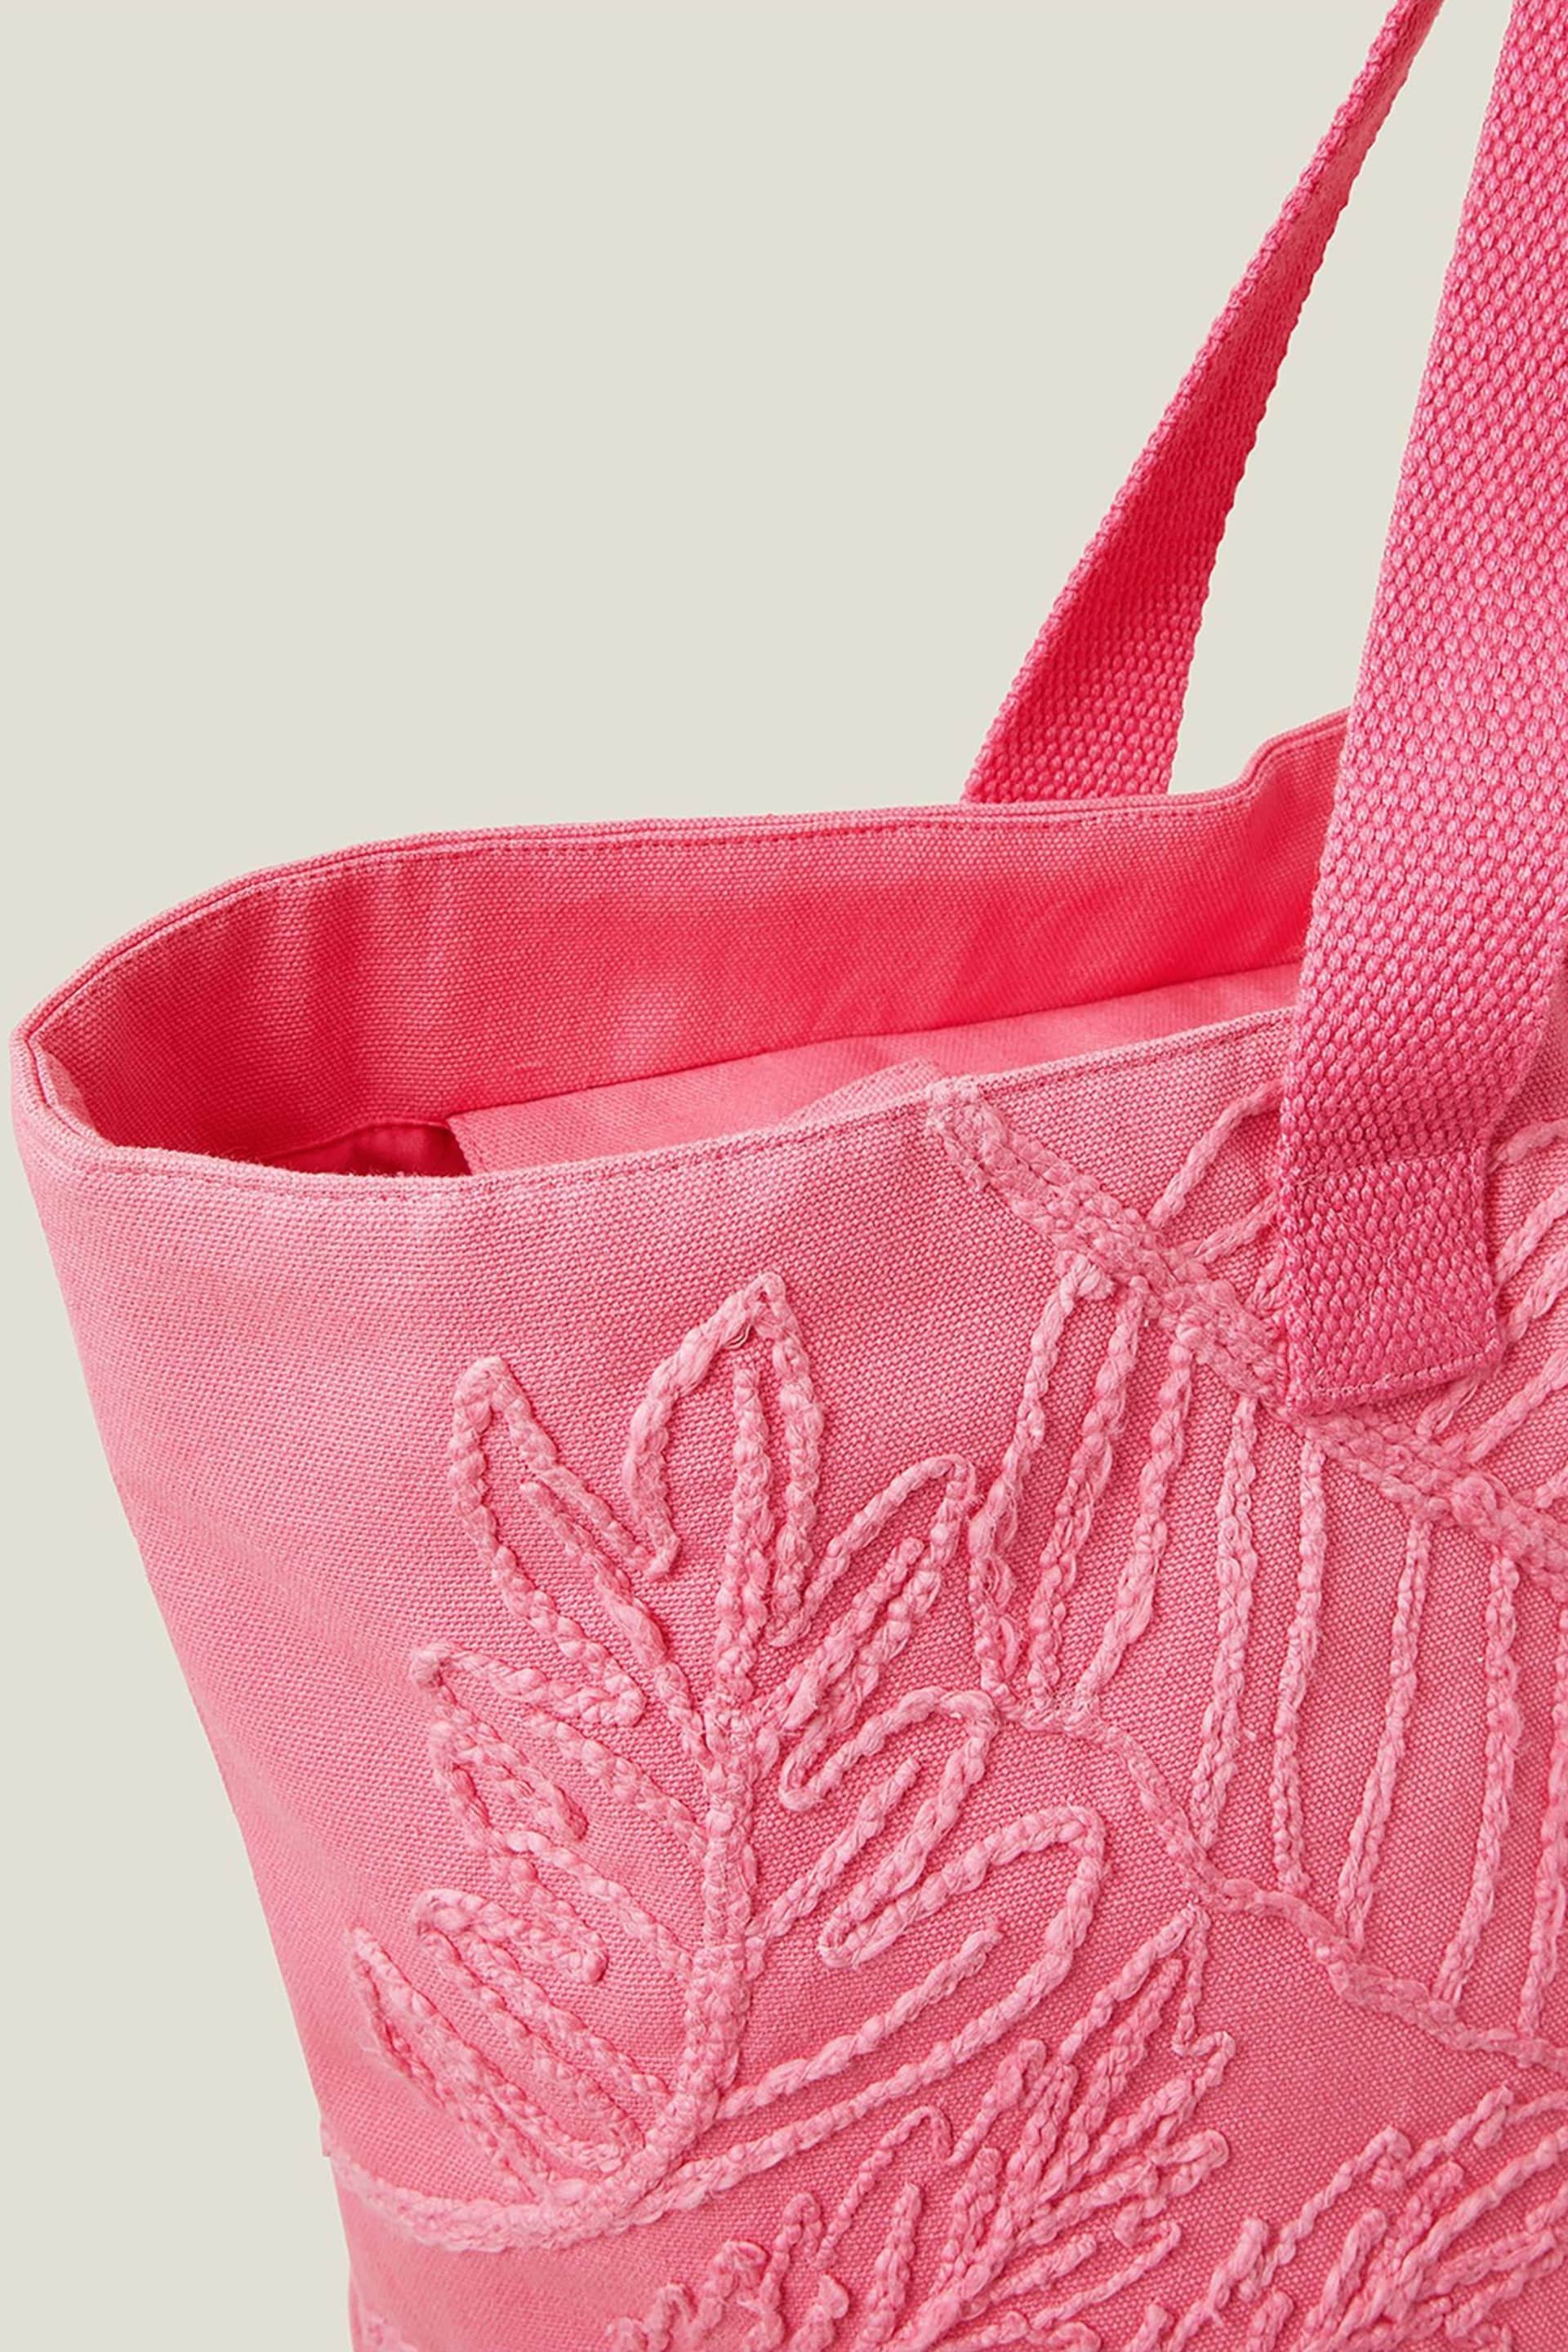 Accessorize Pink Embroidered Shopper Bag - Image 3 of 4